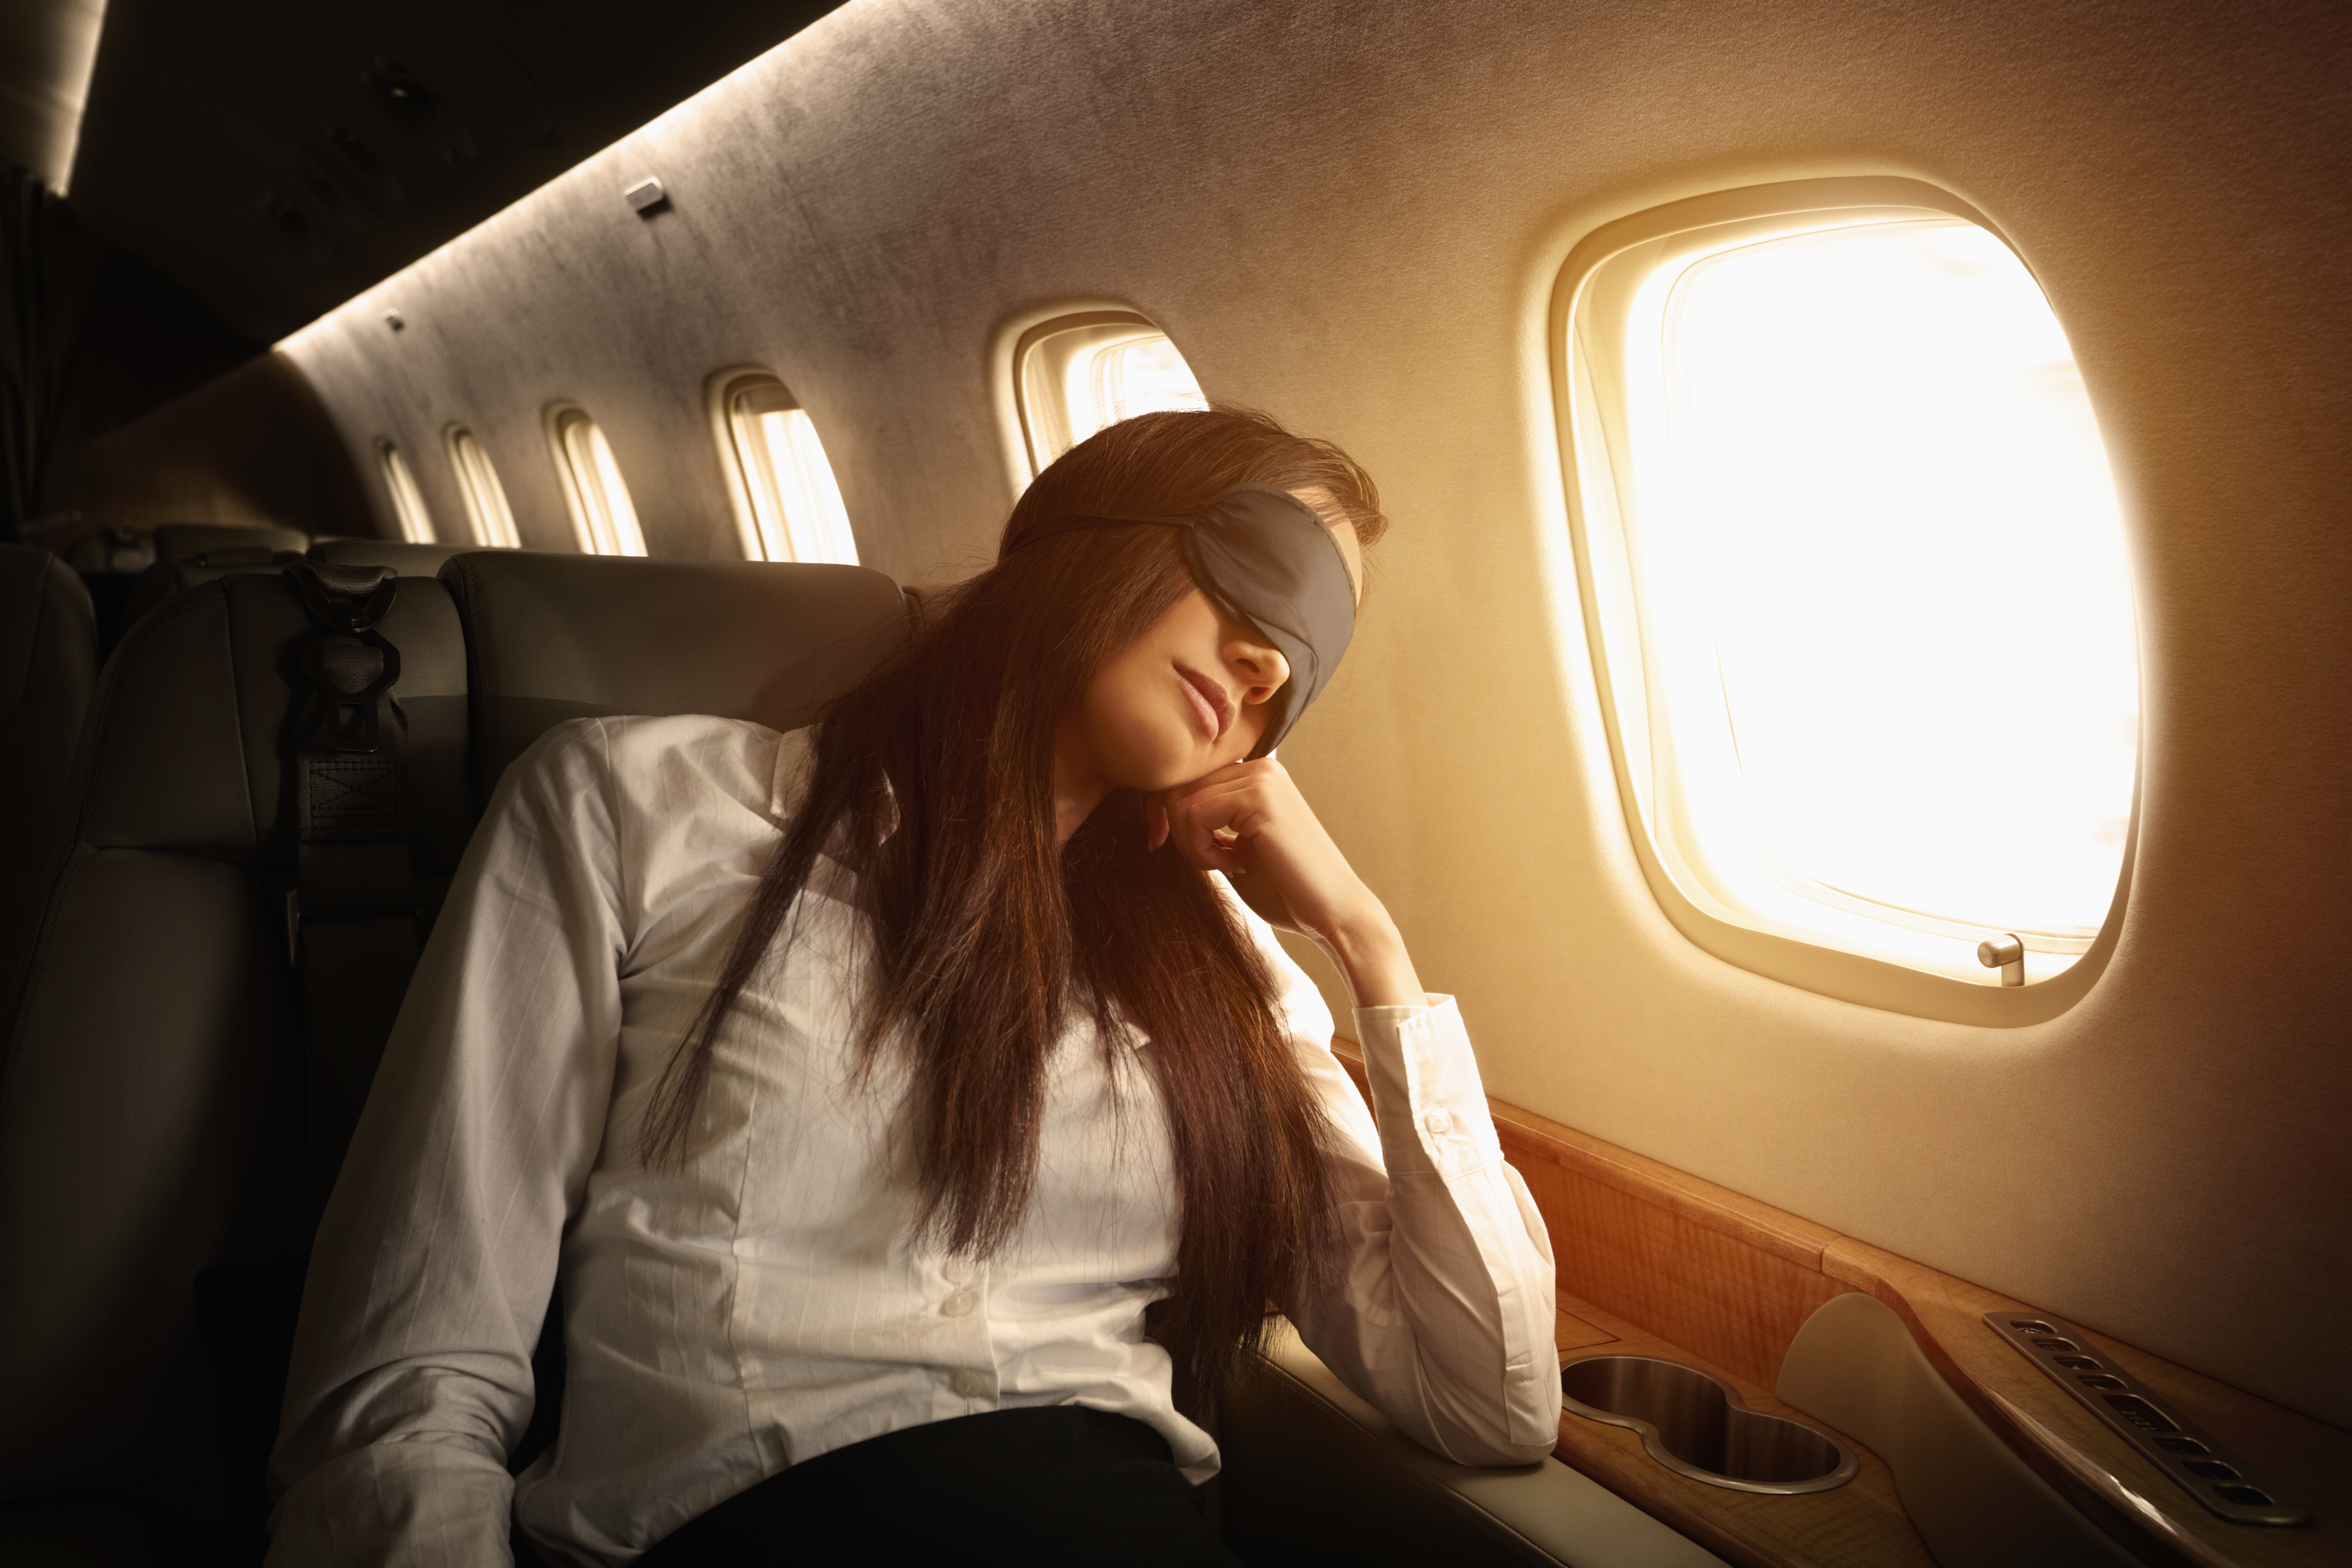 Pacific Islander businesswoman sleeping on private jet | Source: Getty Images